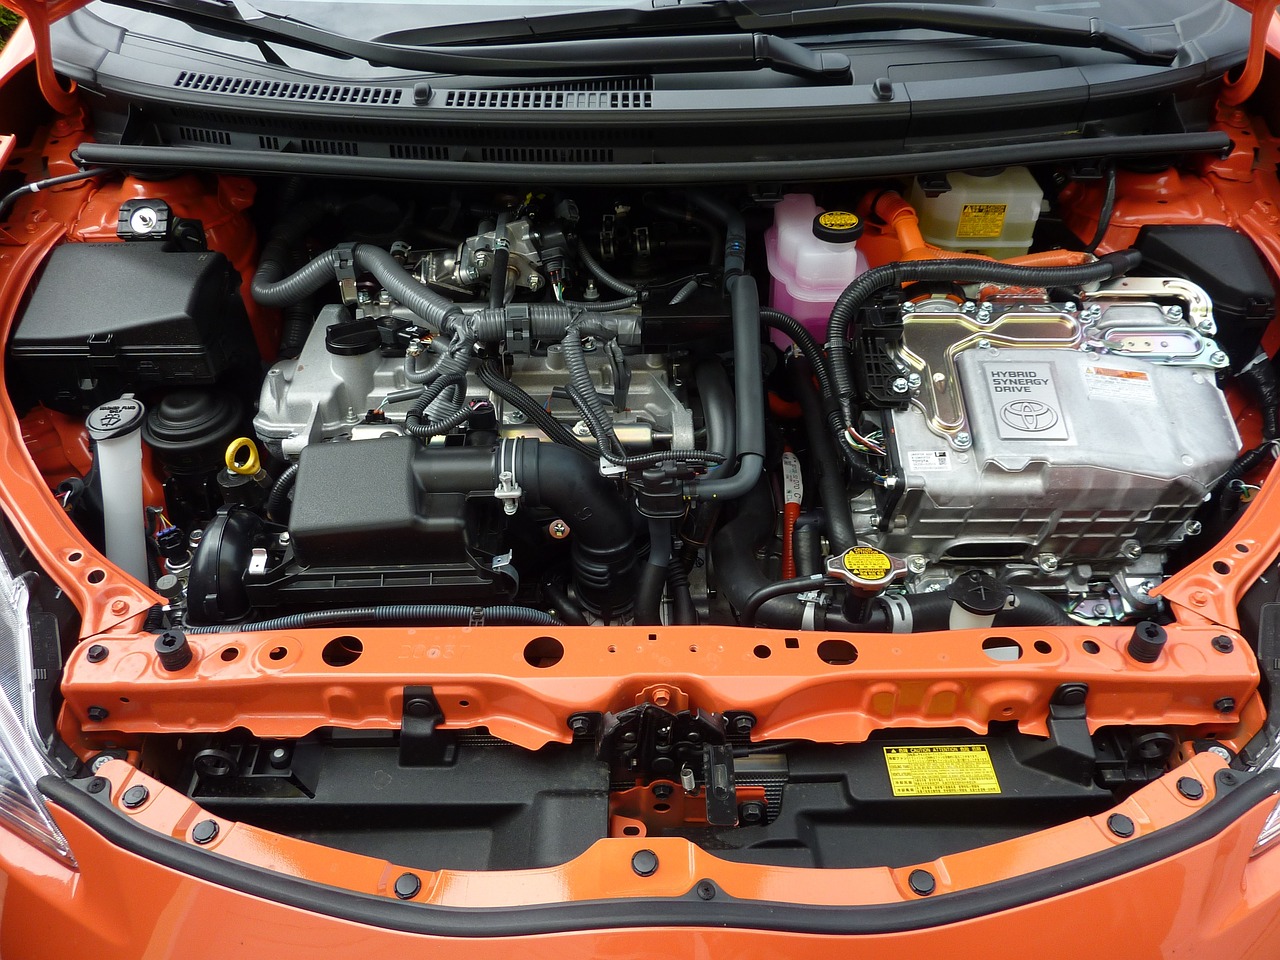 A Toyota Engine under the hood